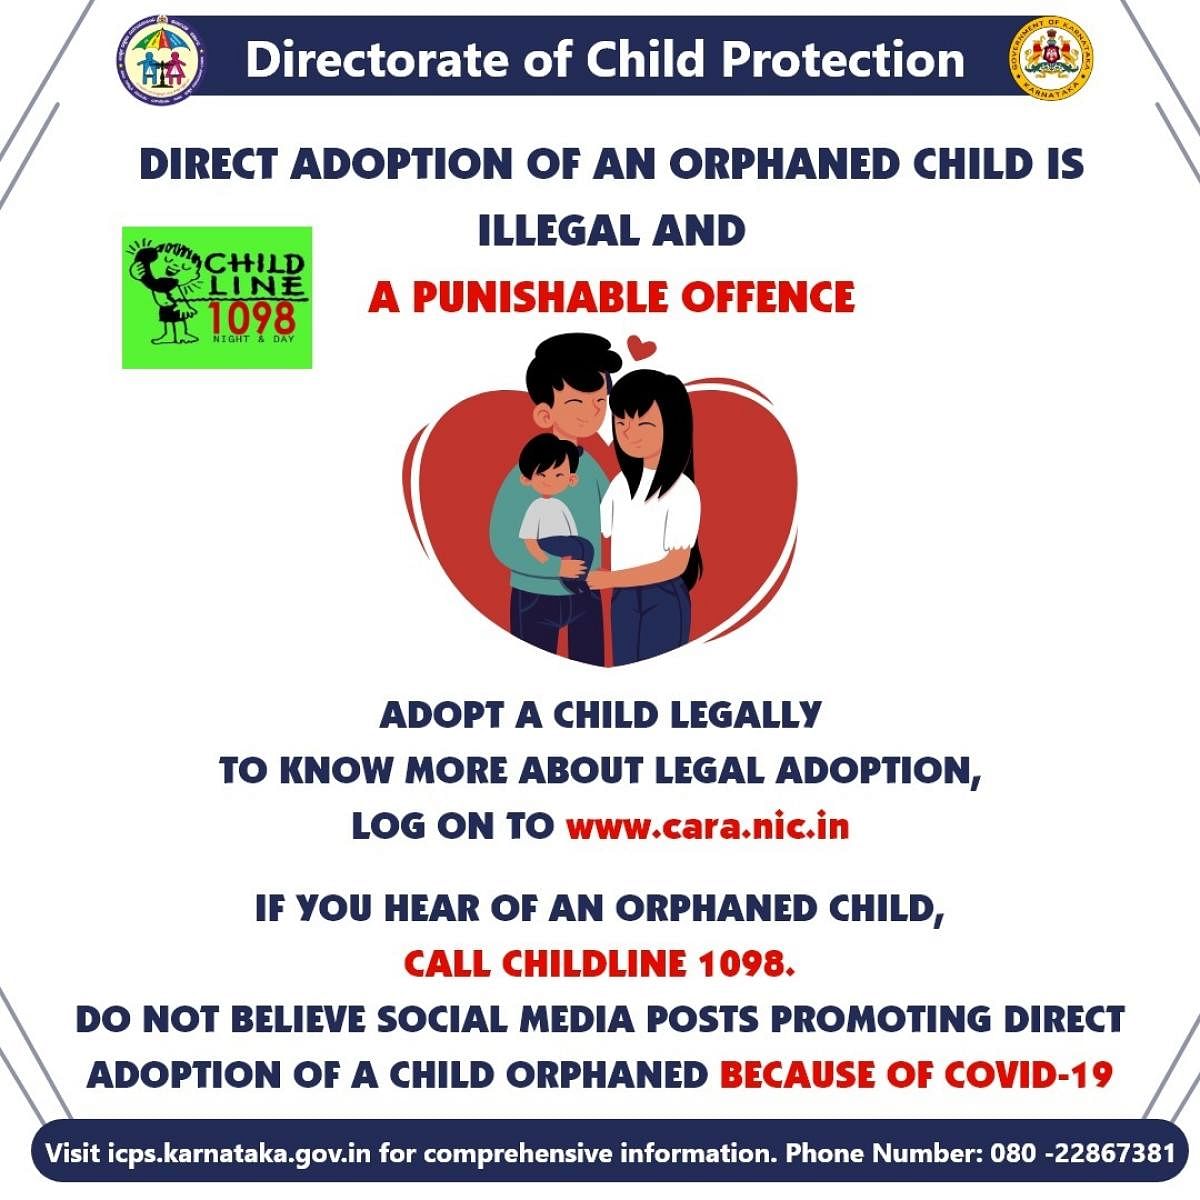 A poster reiterates the importance of due process in adoption.